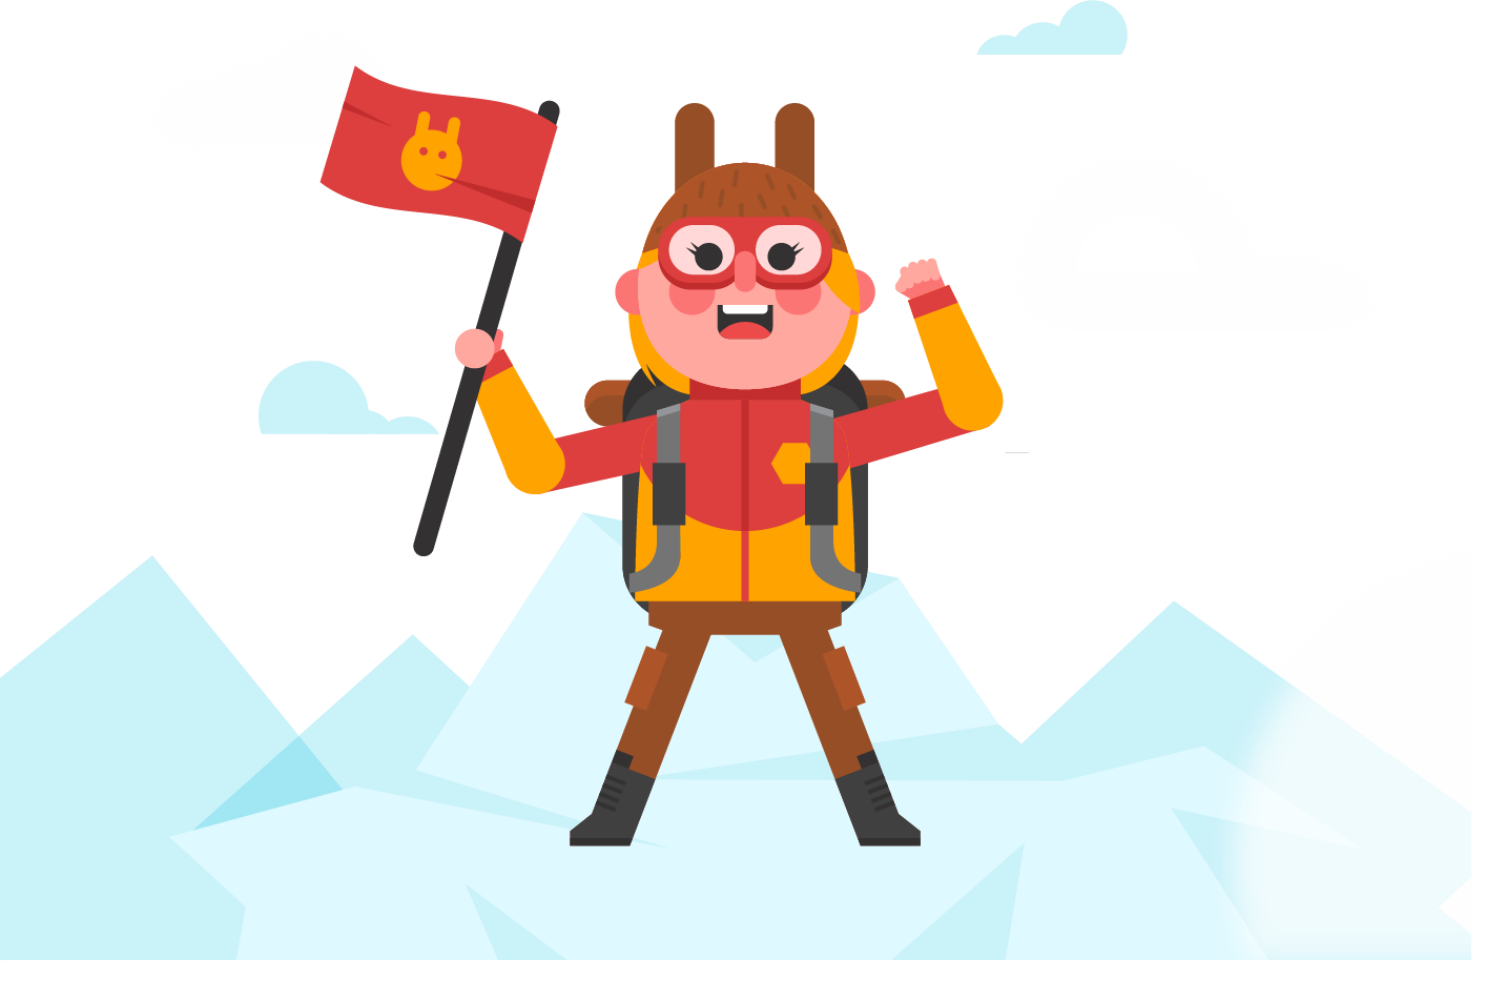 Mount everest climbing mountaineering. Clipart rock character